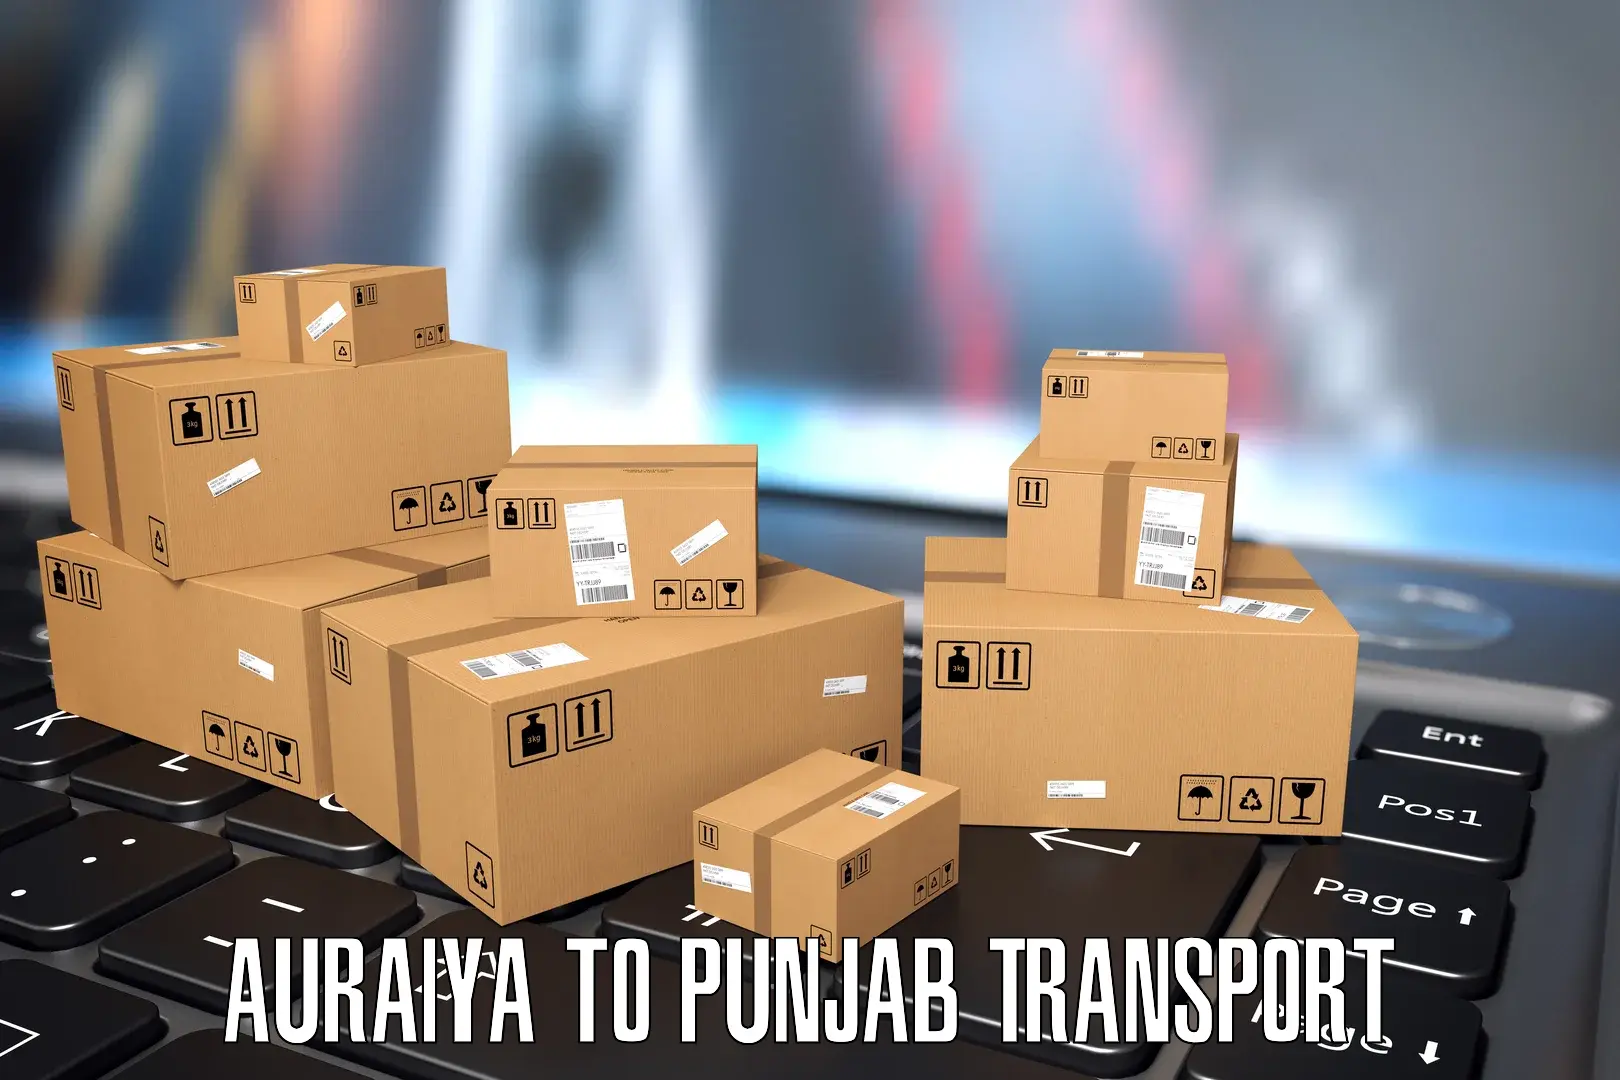 Daily transport service in Auraiya to Mohali